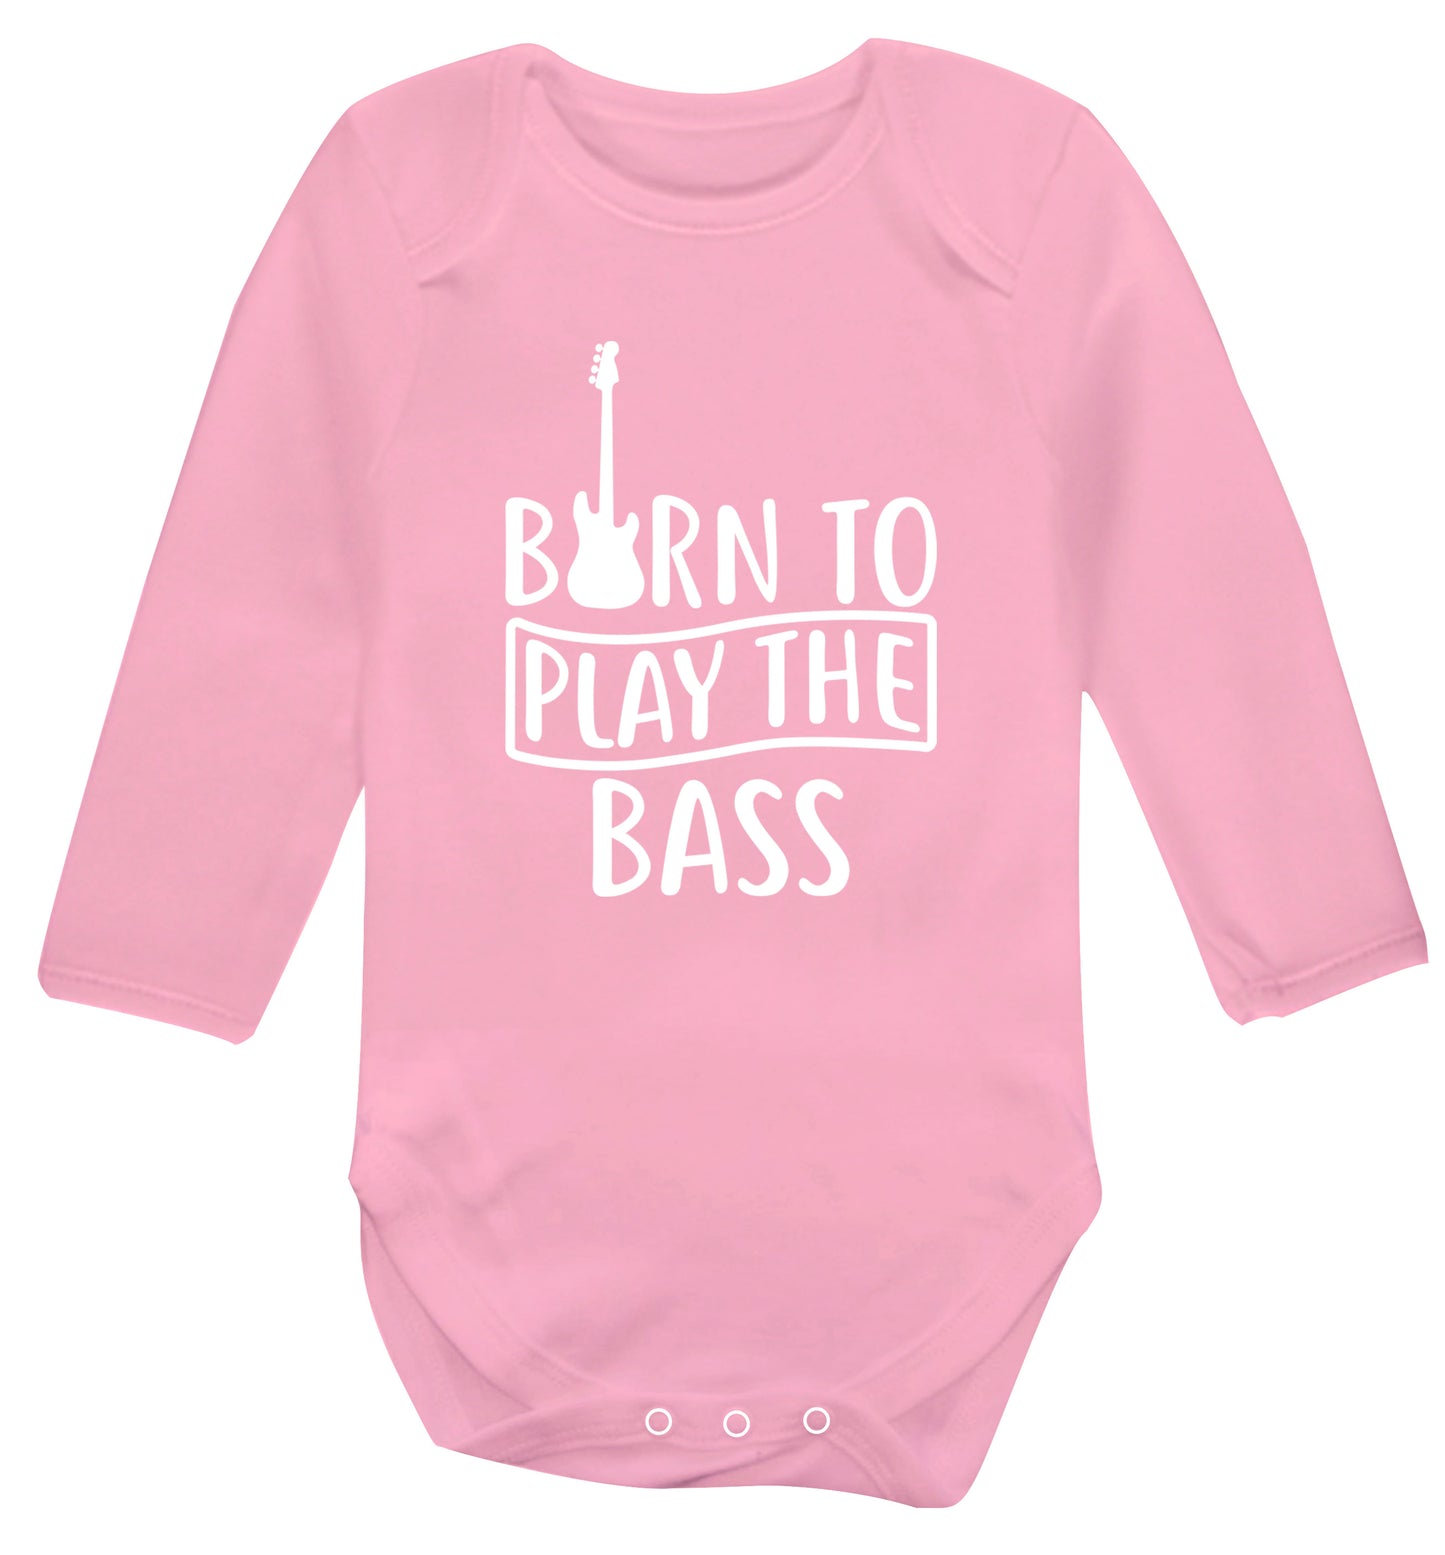 Born to play the bass Baby Vest long sleeved pale pink 6-12 months